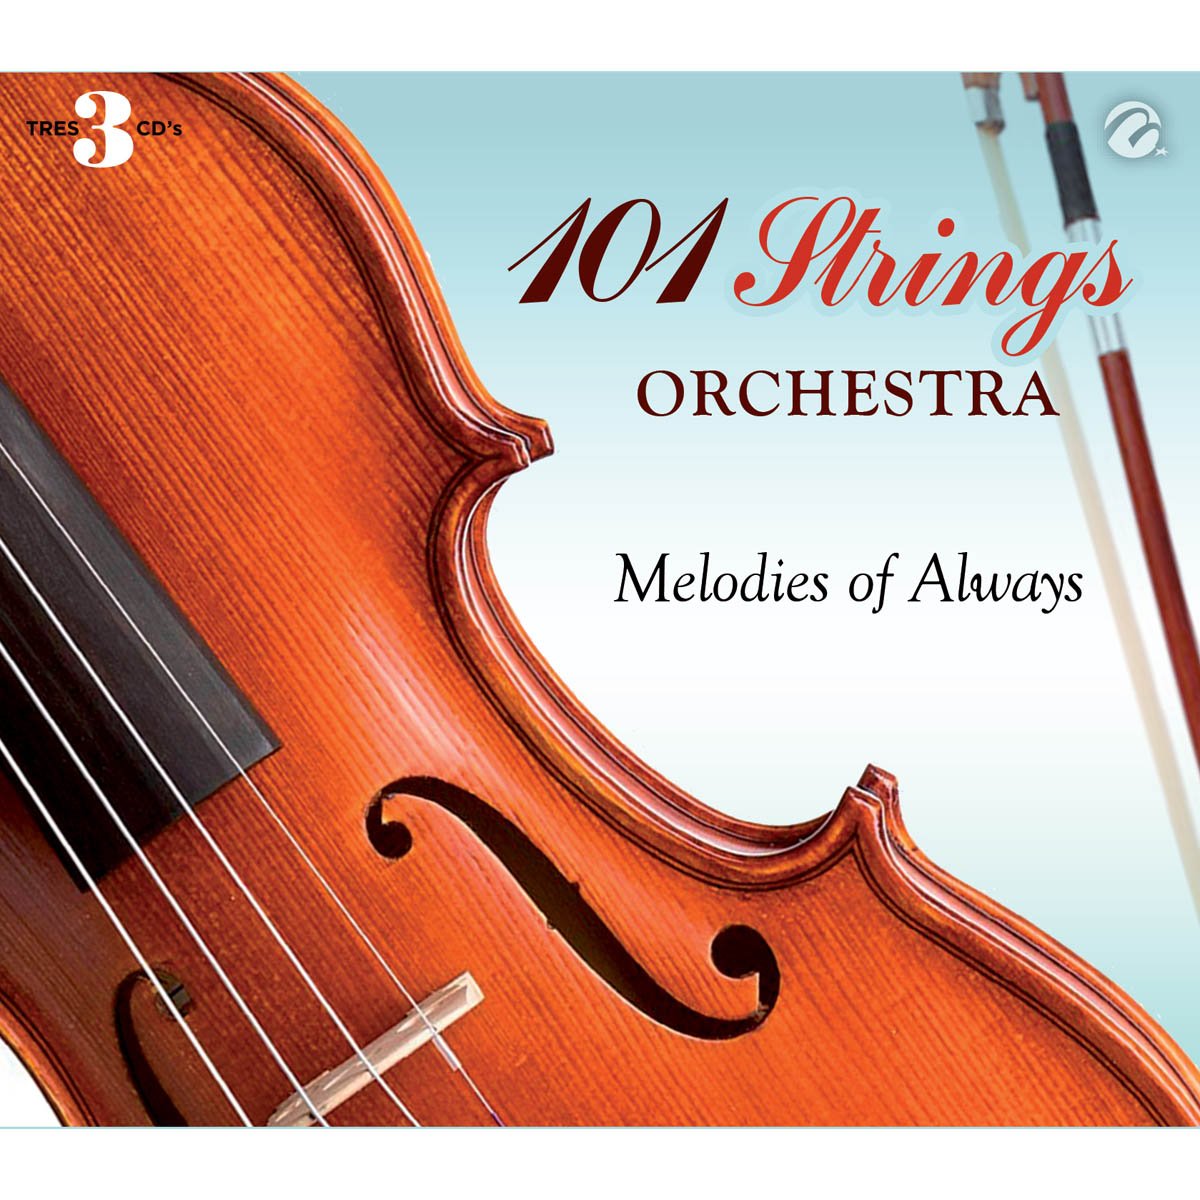 3 Cds 101 Strings Orchestra